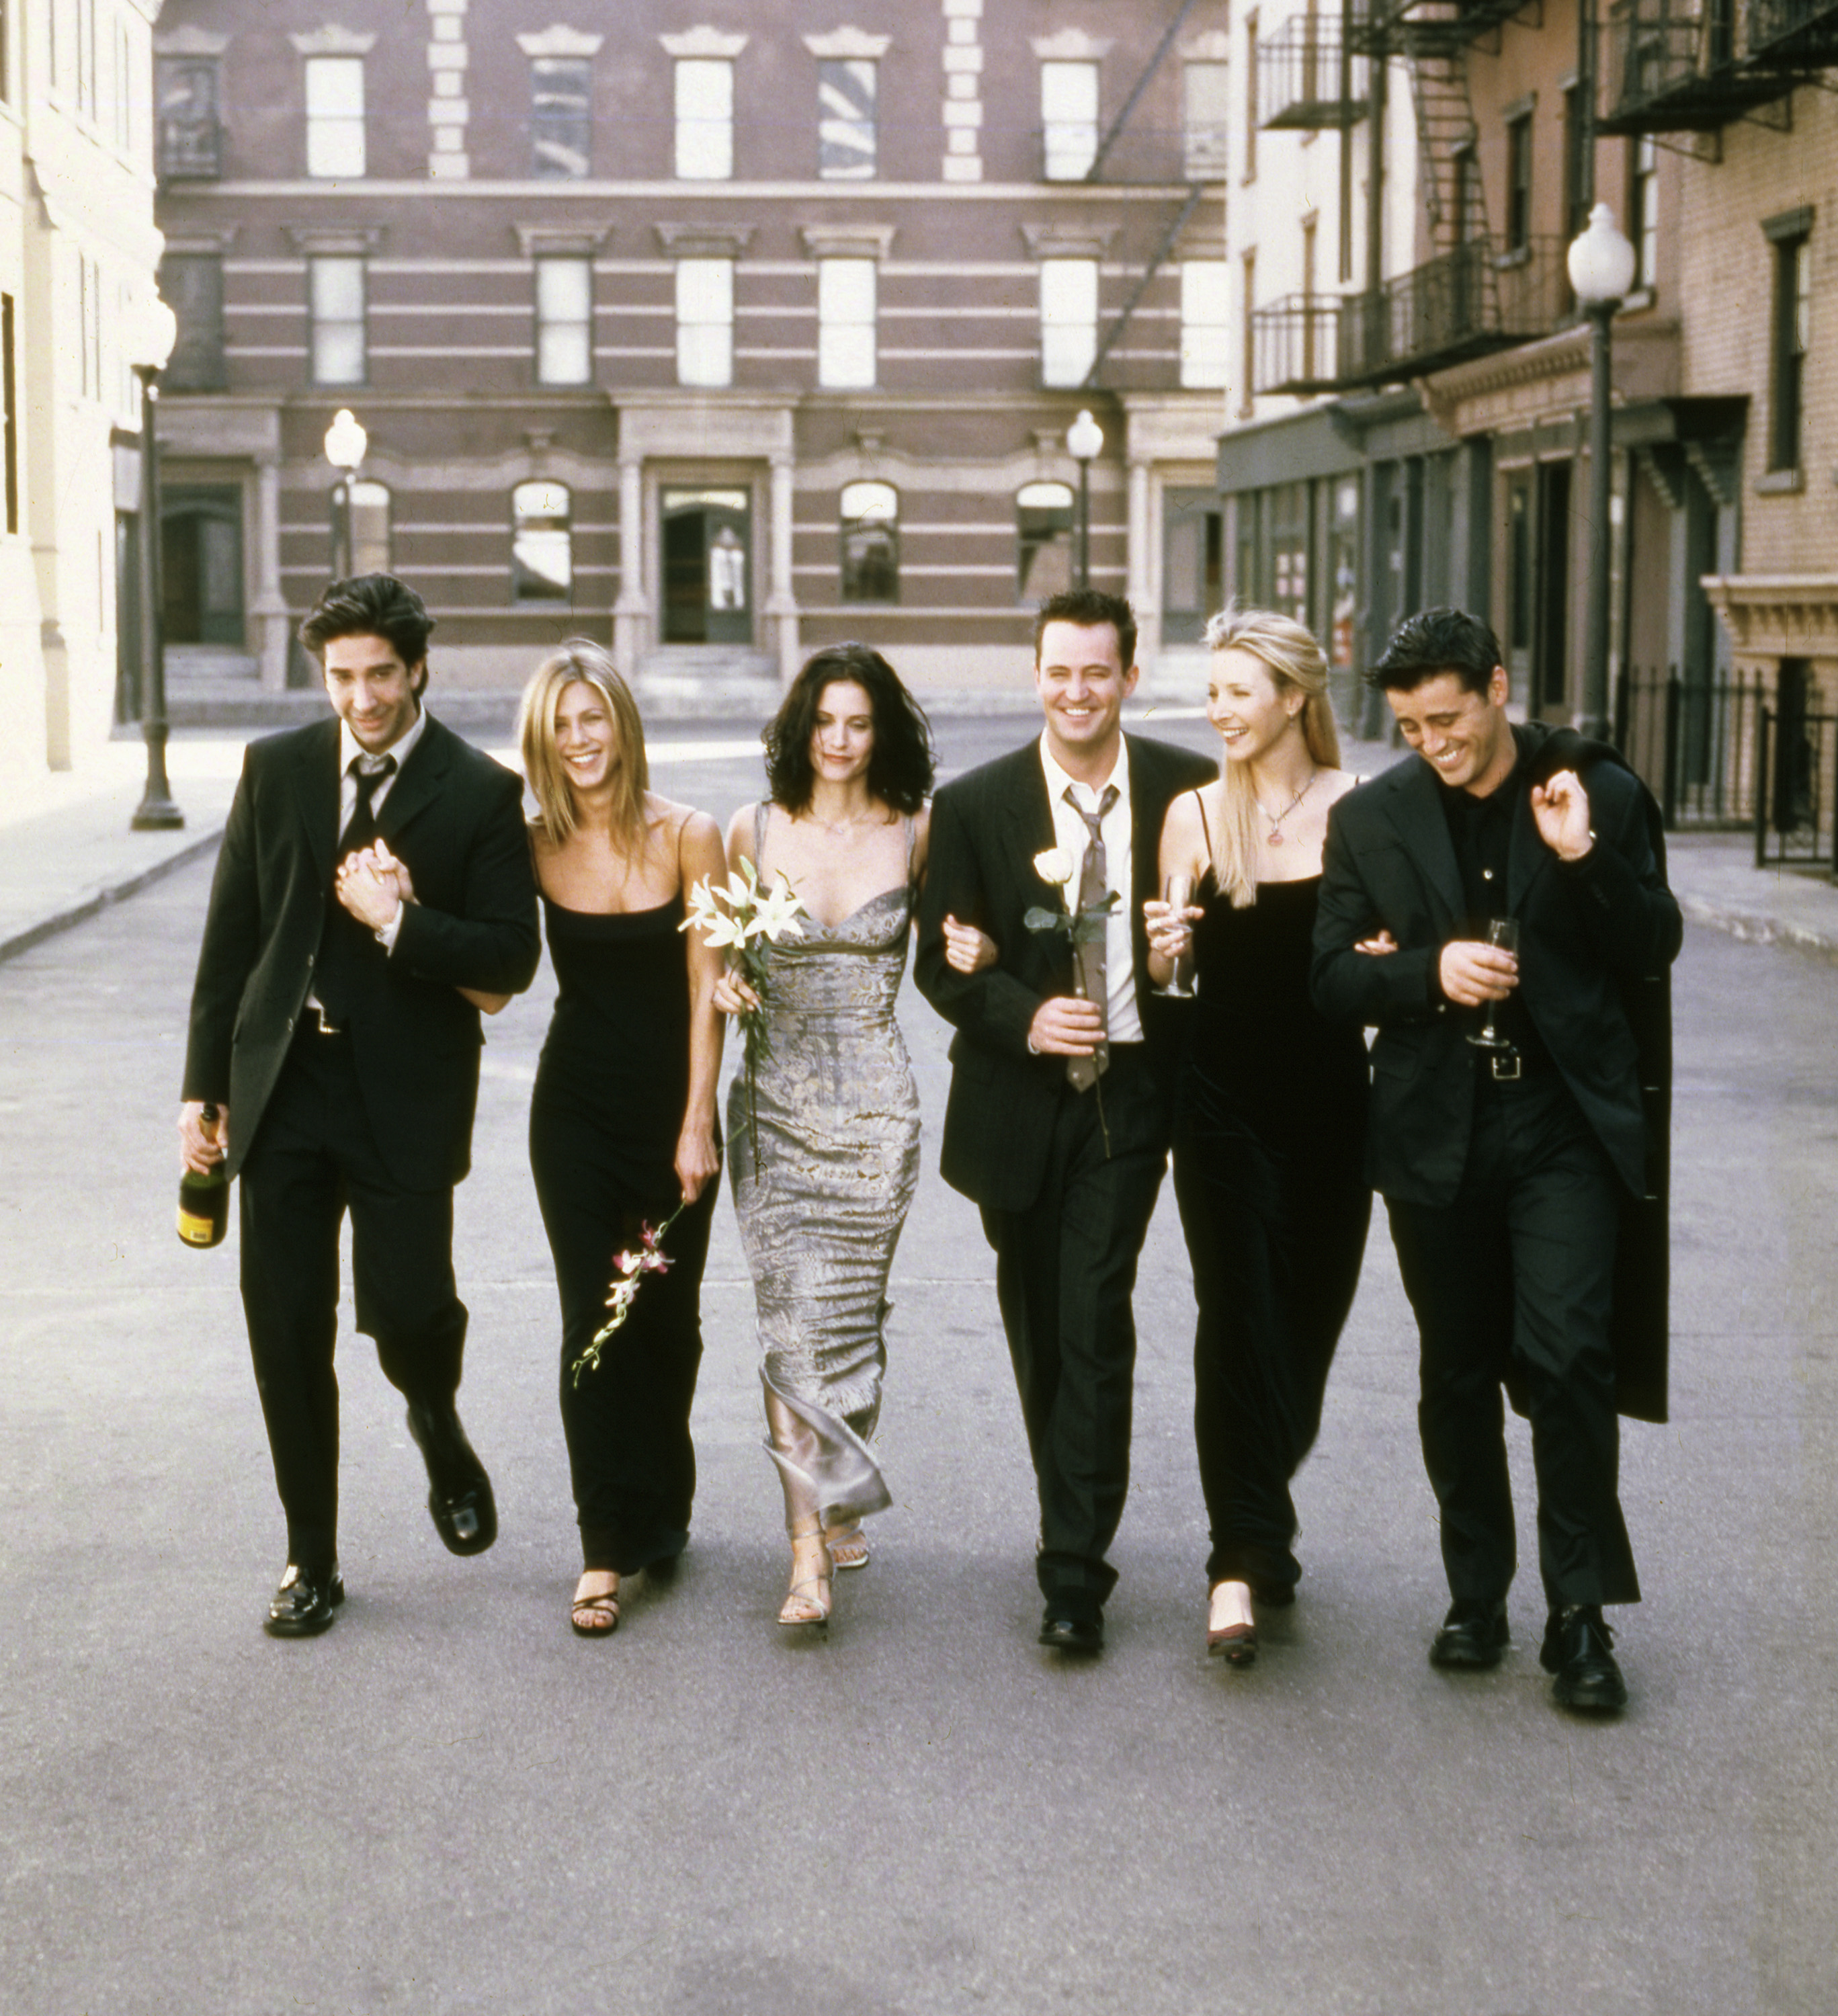 The six castmates walking down the street arm in arm, some holding champagne glasses